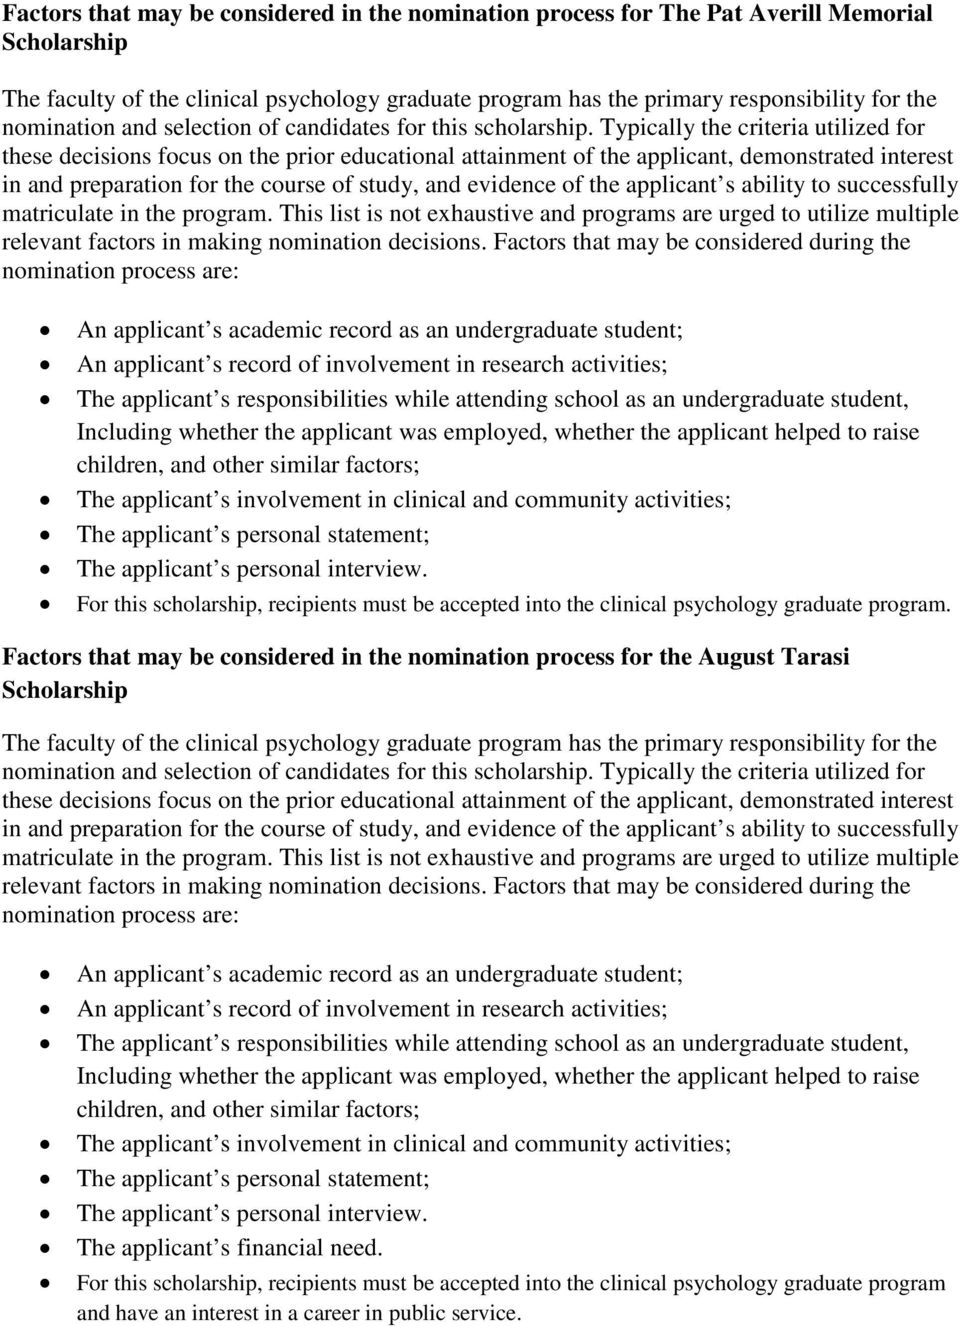 Factors that may be considered in the nomination process for the August Tarasi For this scholarship,